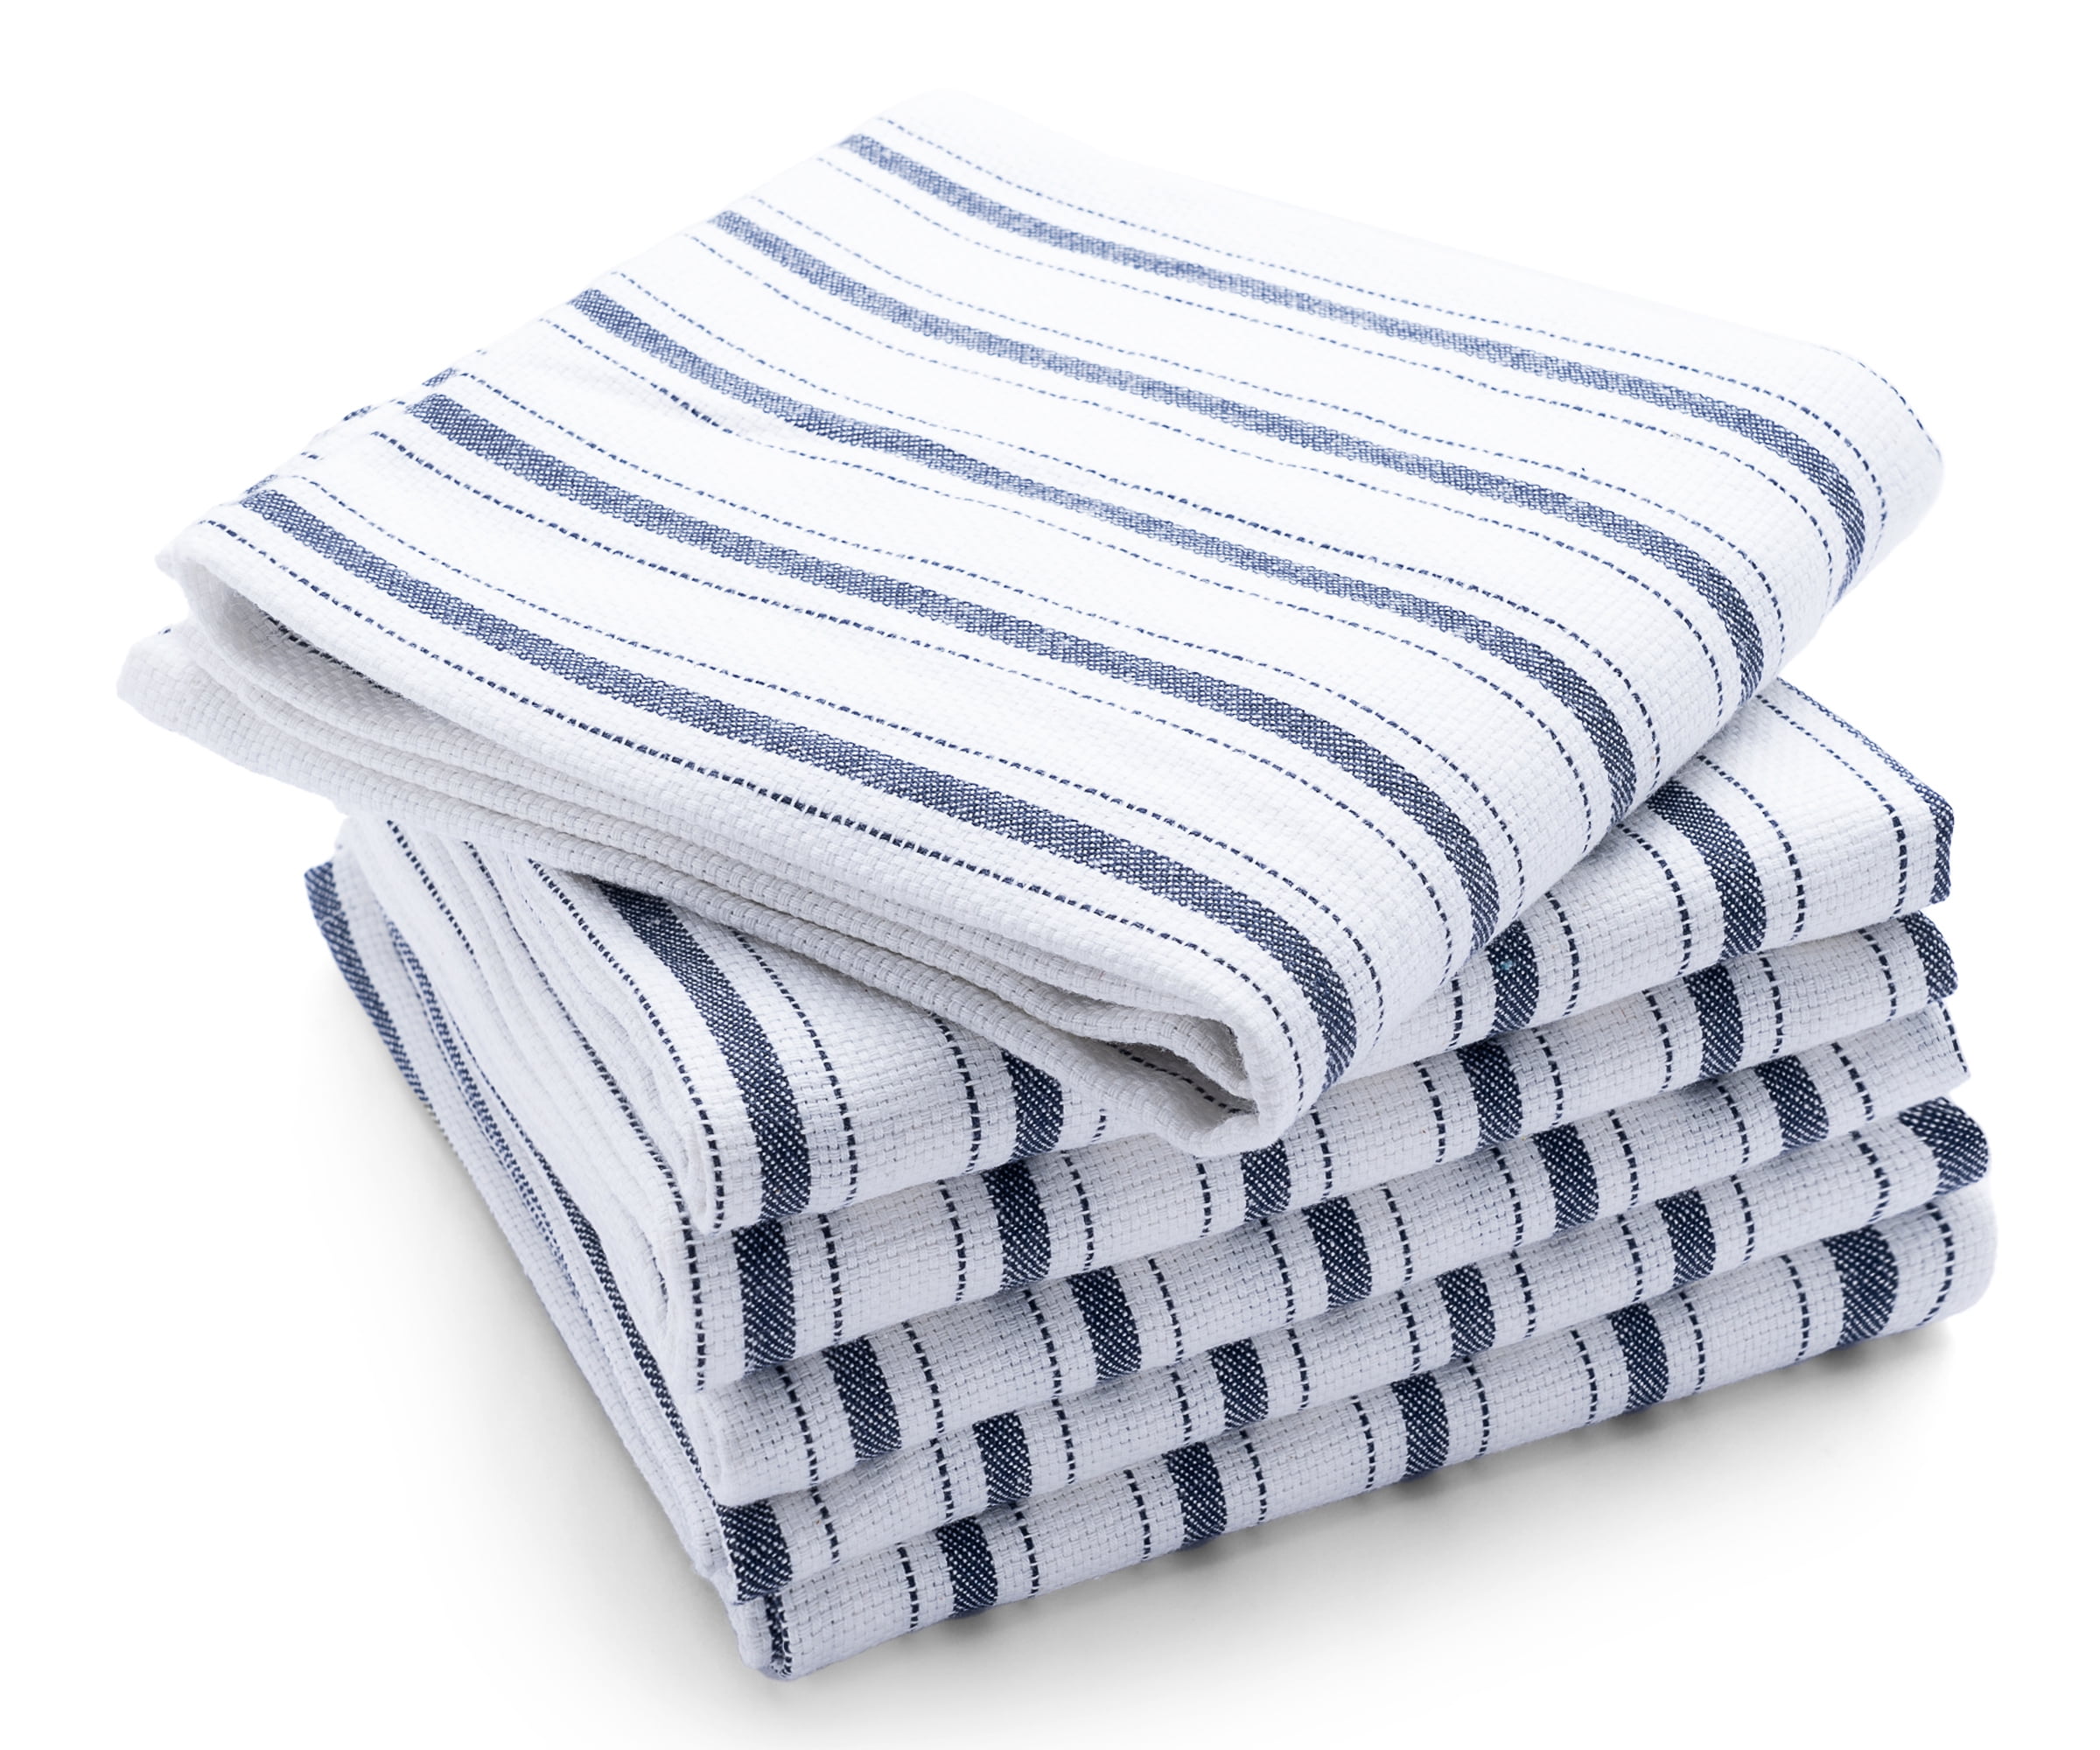 All Cotton and Linen Kitchen Towels, Cotton Dish Towels, Absorbent